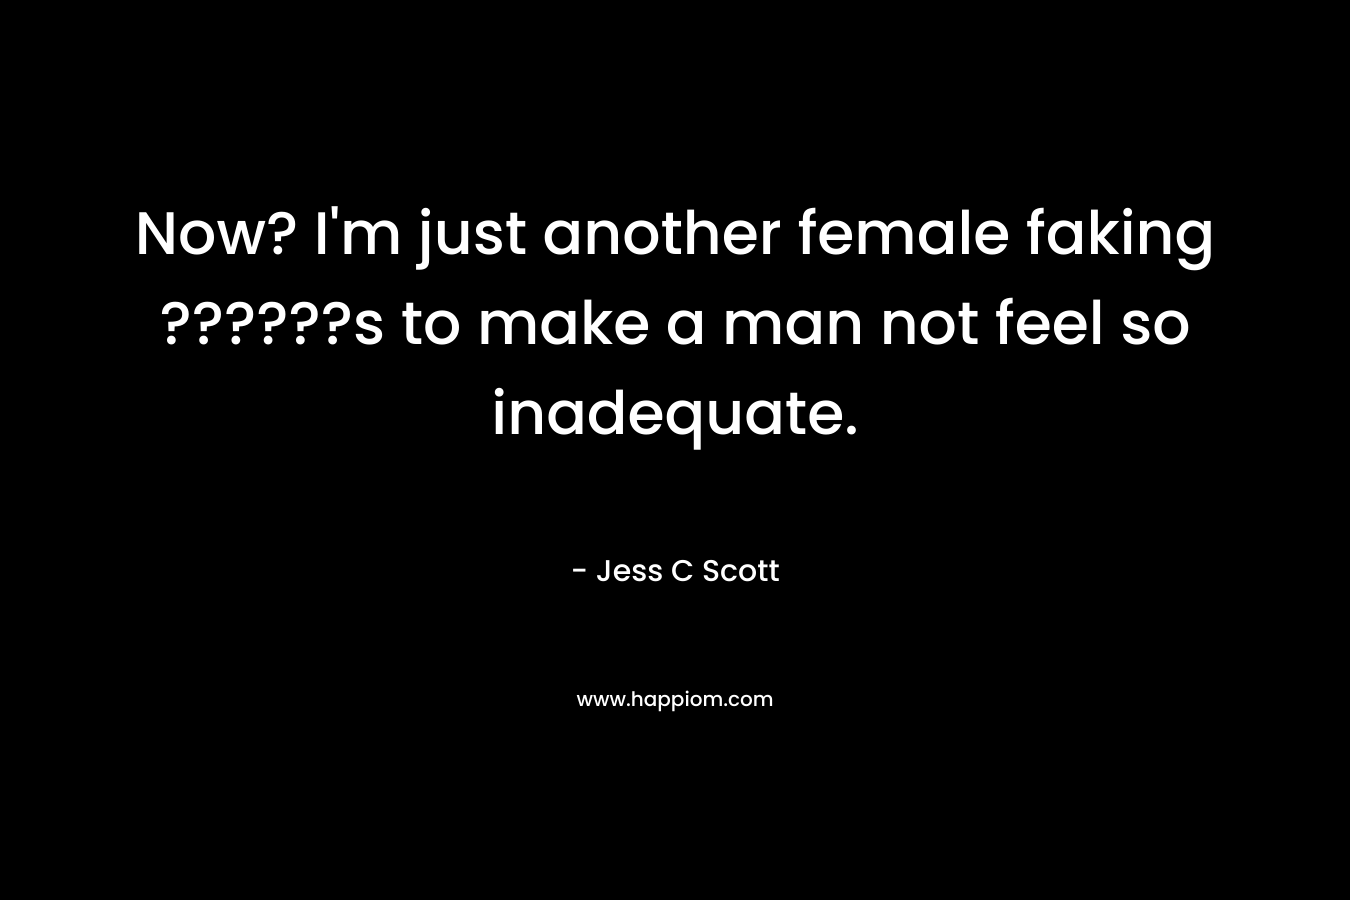 Now? I'm just another female faking ??????s to make a man not feel so inadequate.